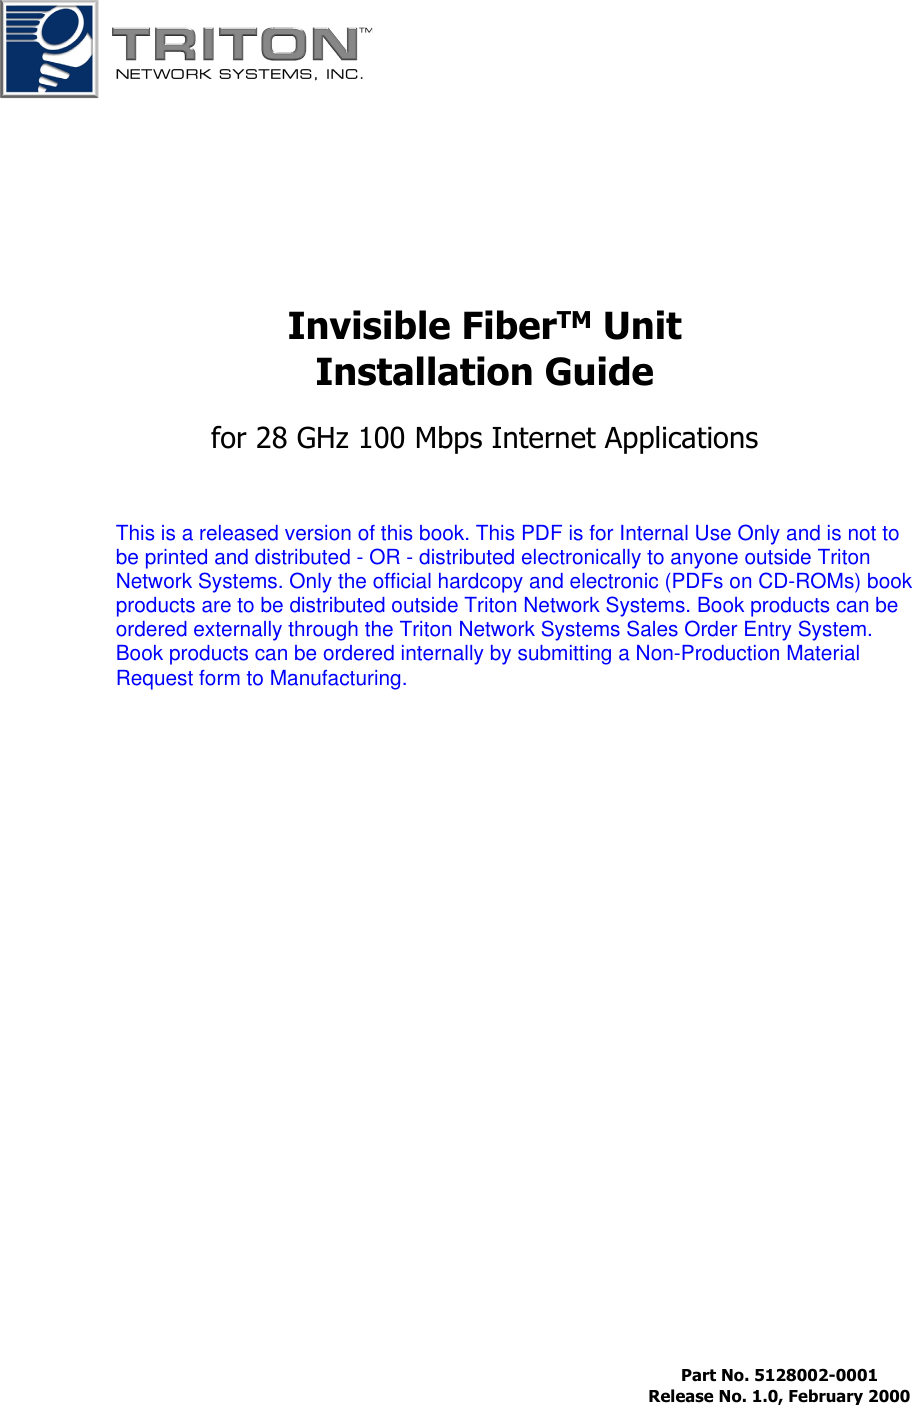 Invisible FiberTM UnitInstallation Guidefor 28 GHz 100 Mbps Internet Applications Part No. 5128002-0001 Release No. 1.0, February 2000This is a released version of this book. This PDF is for Internal Use Only and is not tobe printed and distributed - OR - distributed electronically to anyone outside TritonNetwork Systems. Only the official hardcopy and electronic (PDFs on CD-ROMs) bookproducts are to be distributed outside Triton Network Systems. Book products can beordered externally through the Triton Network Systems Sales Order Entry System.Book products can be ordered internally by submitting a Non-Production MaterialRequest form to Manufacturing.